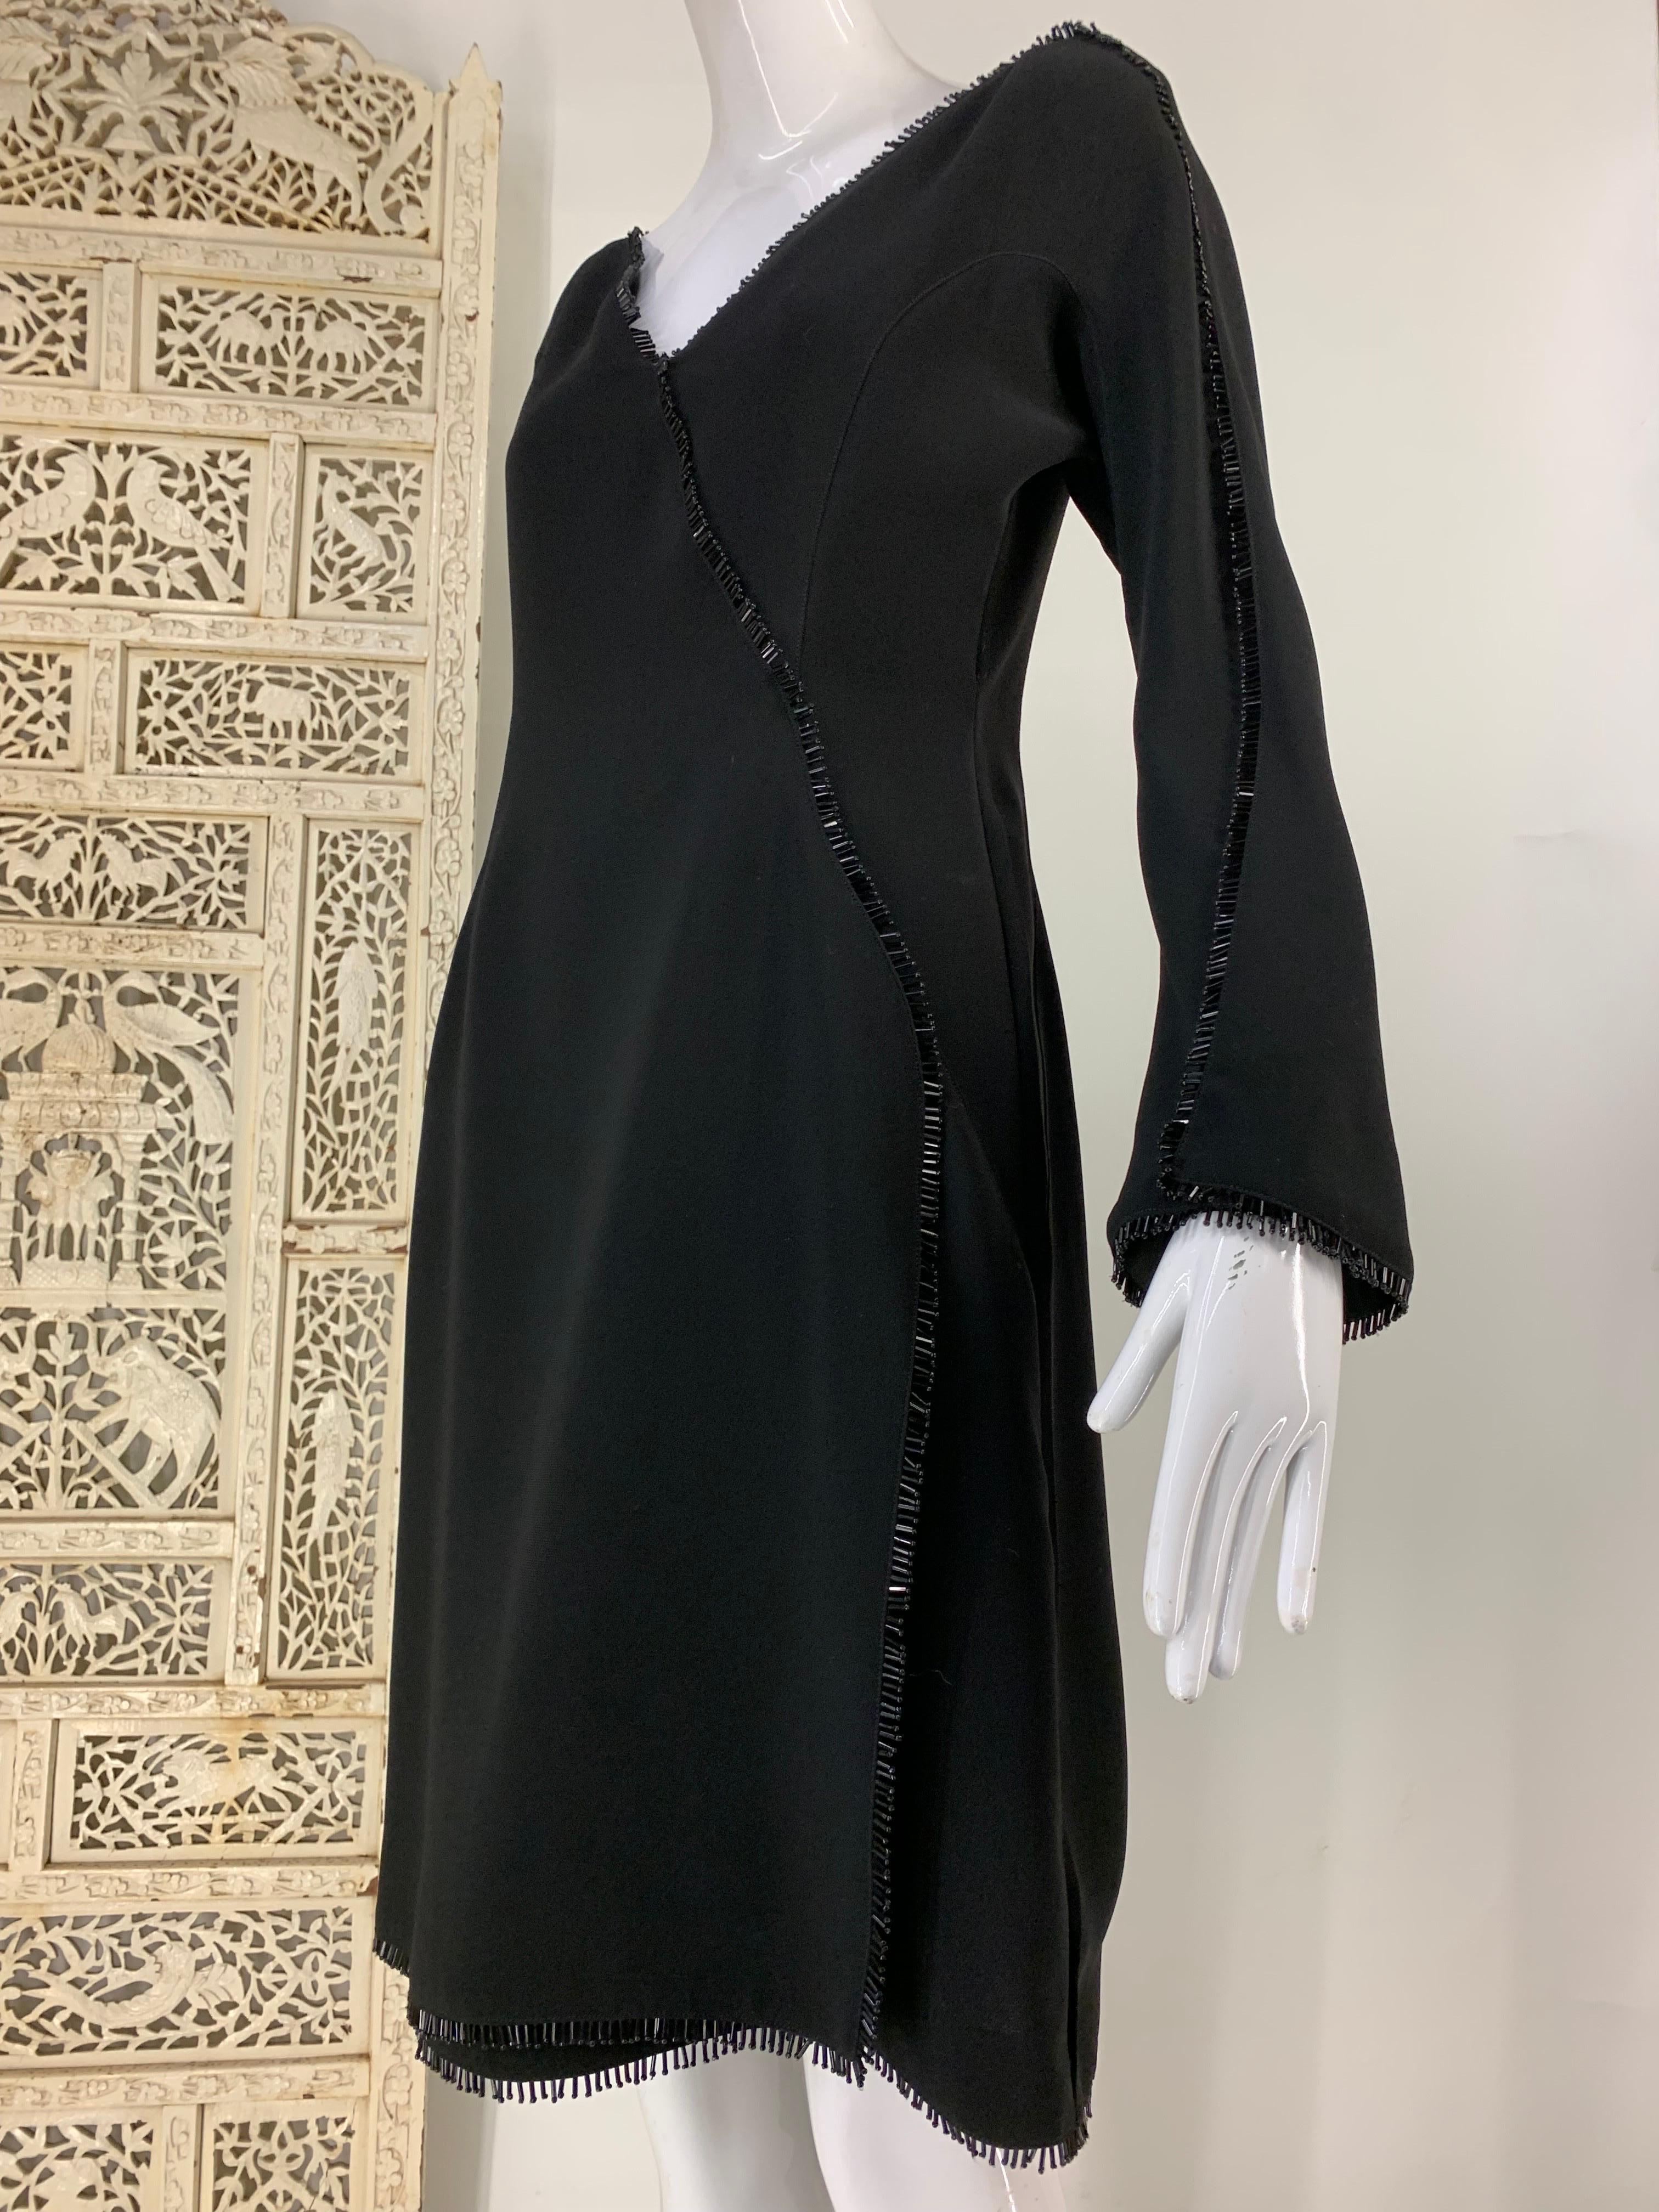 1990s Thierry Mugler Fit & Flare Wrap Style Black Cocktail Dress w Bead Fringe: Bugle beaded fringe edgework with bell shaped sleeves. Tailored rounded shoulders and 40s-inspired silhouette. Marked EU size 38. 